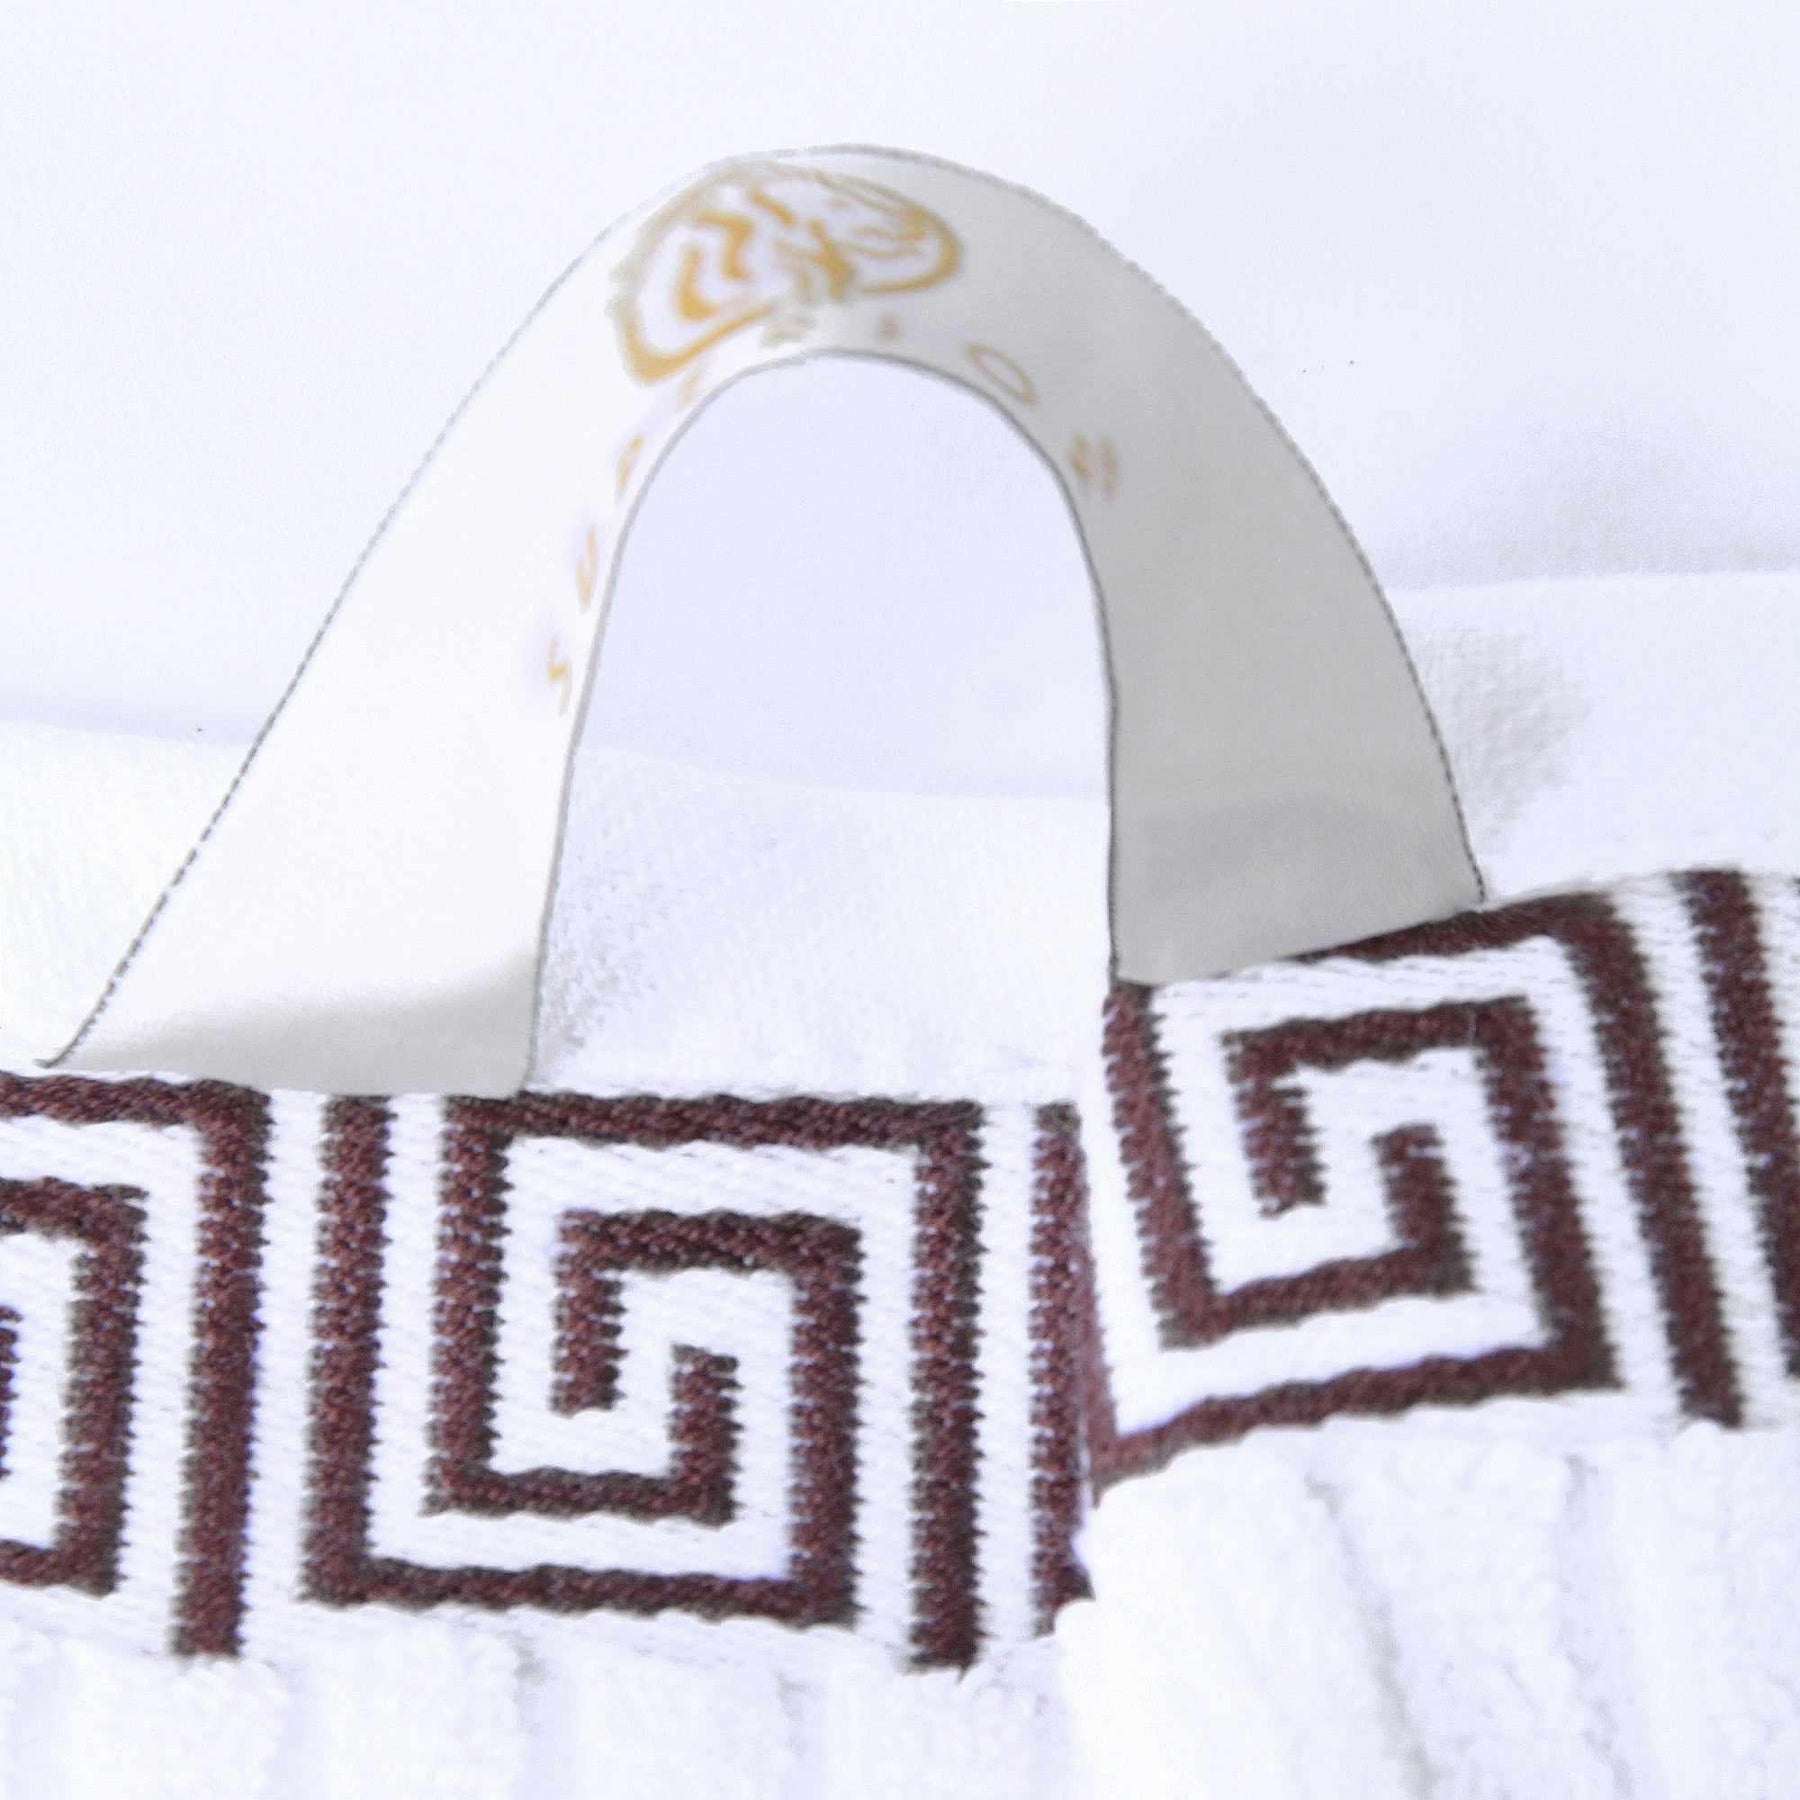 Superior Athens Cotton 8-Piece Towel Set with Greek Scroll and Floral Pattern - White-Chocolate